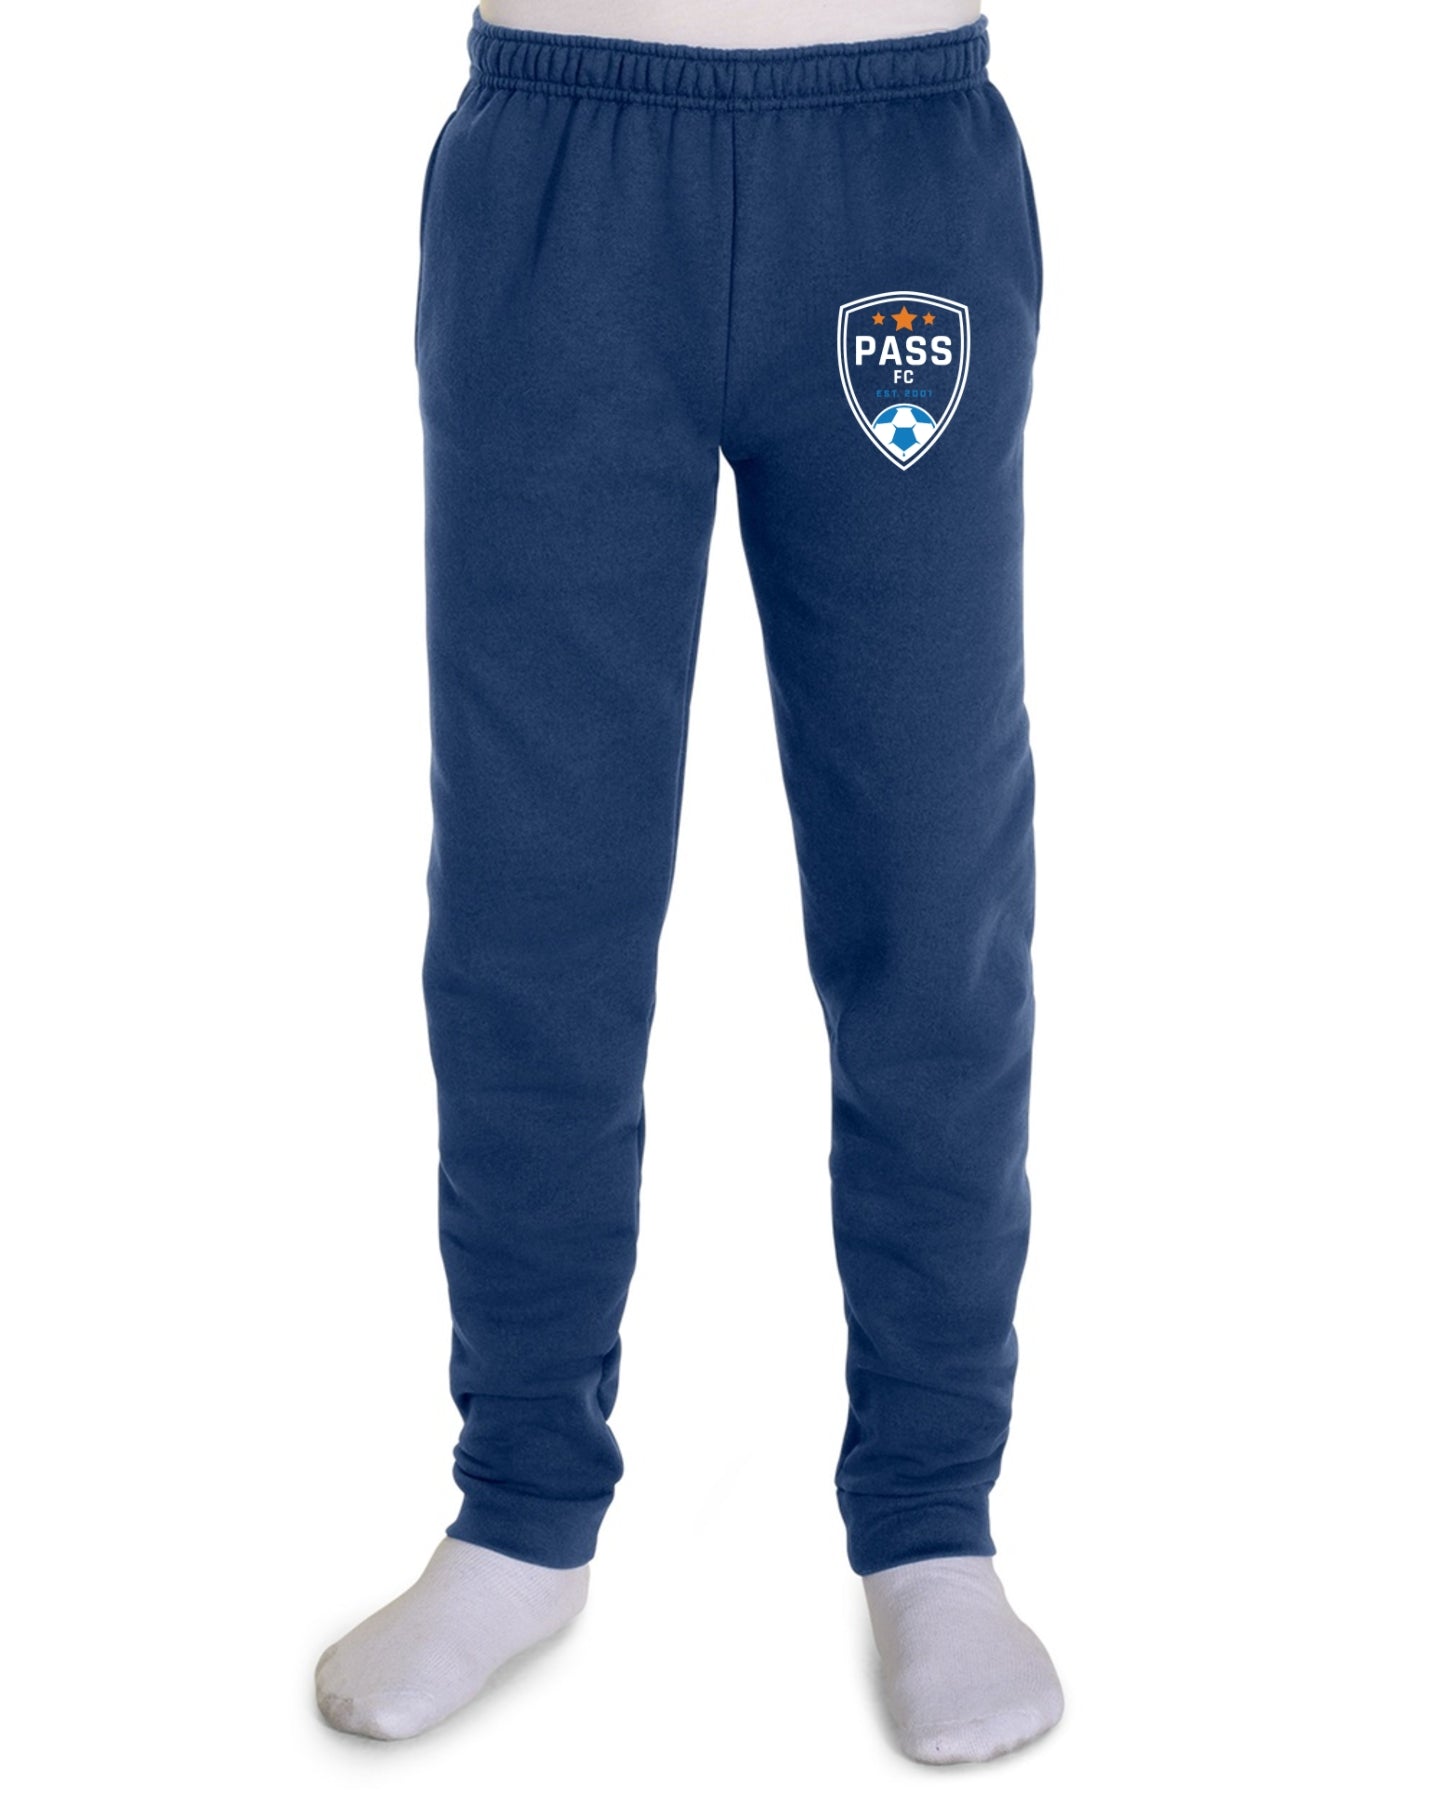 PASS FC YOUTH Pocketed Jogger Sweatpants